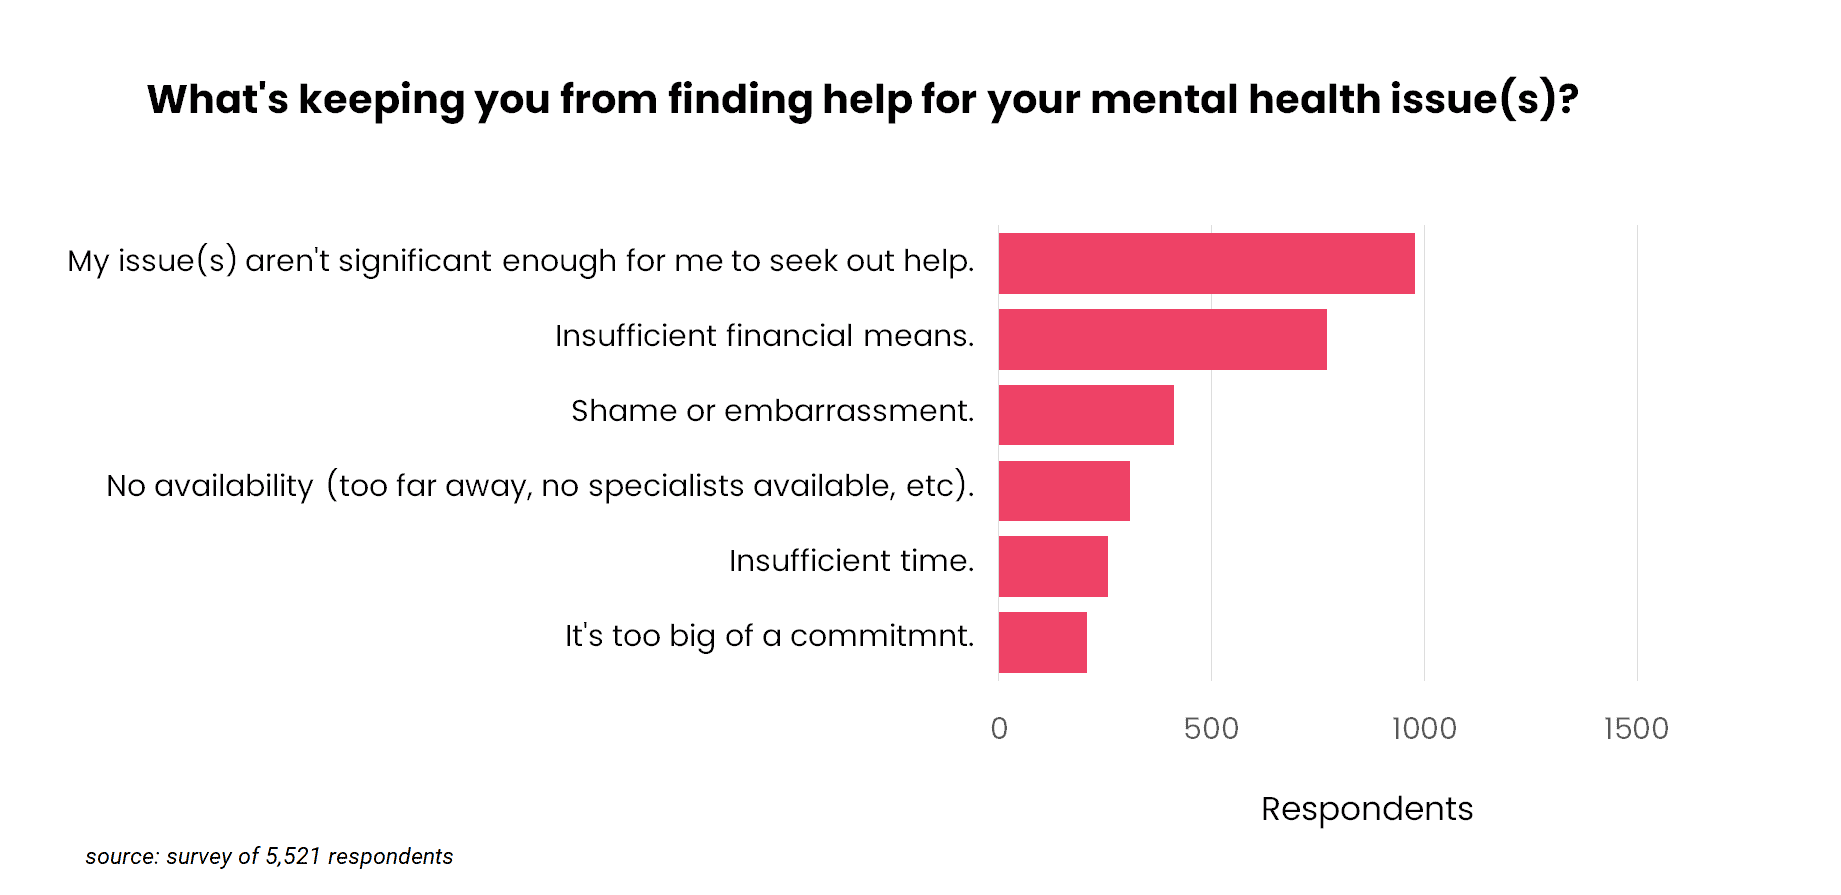 reasons for not receiving help mental health issues bar chart